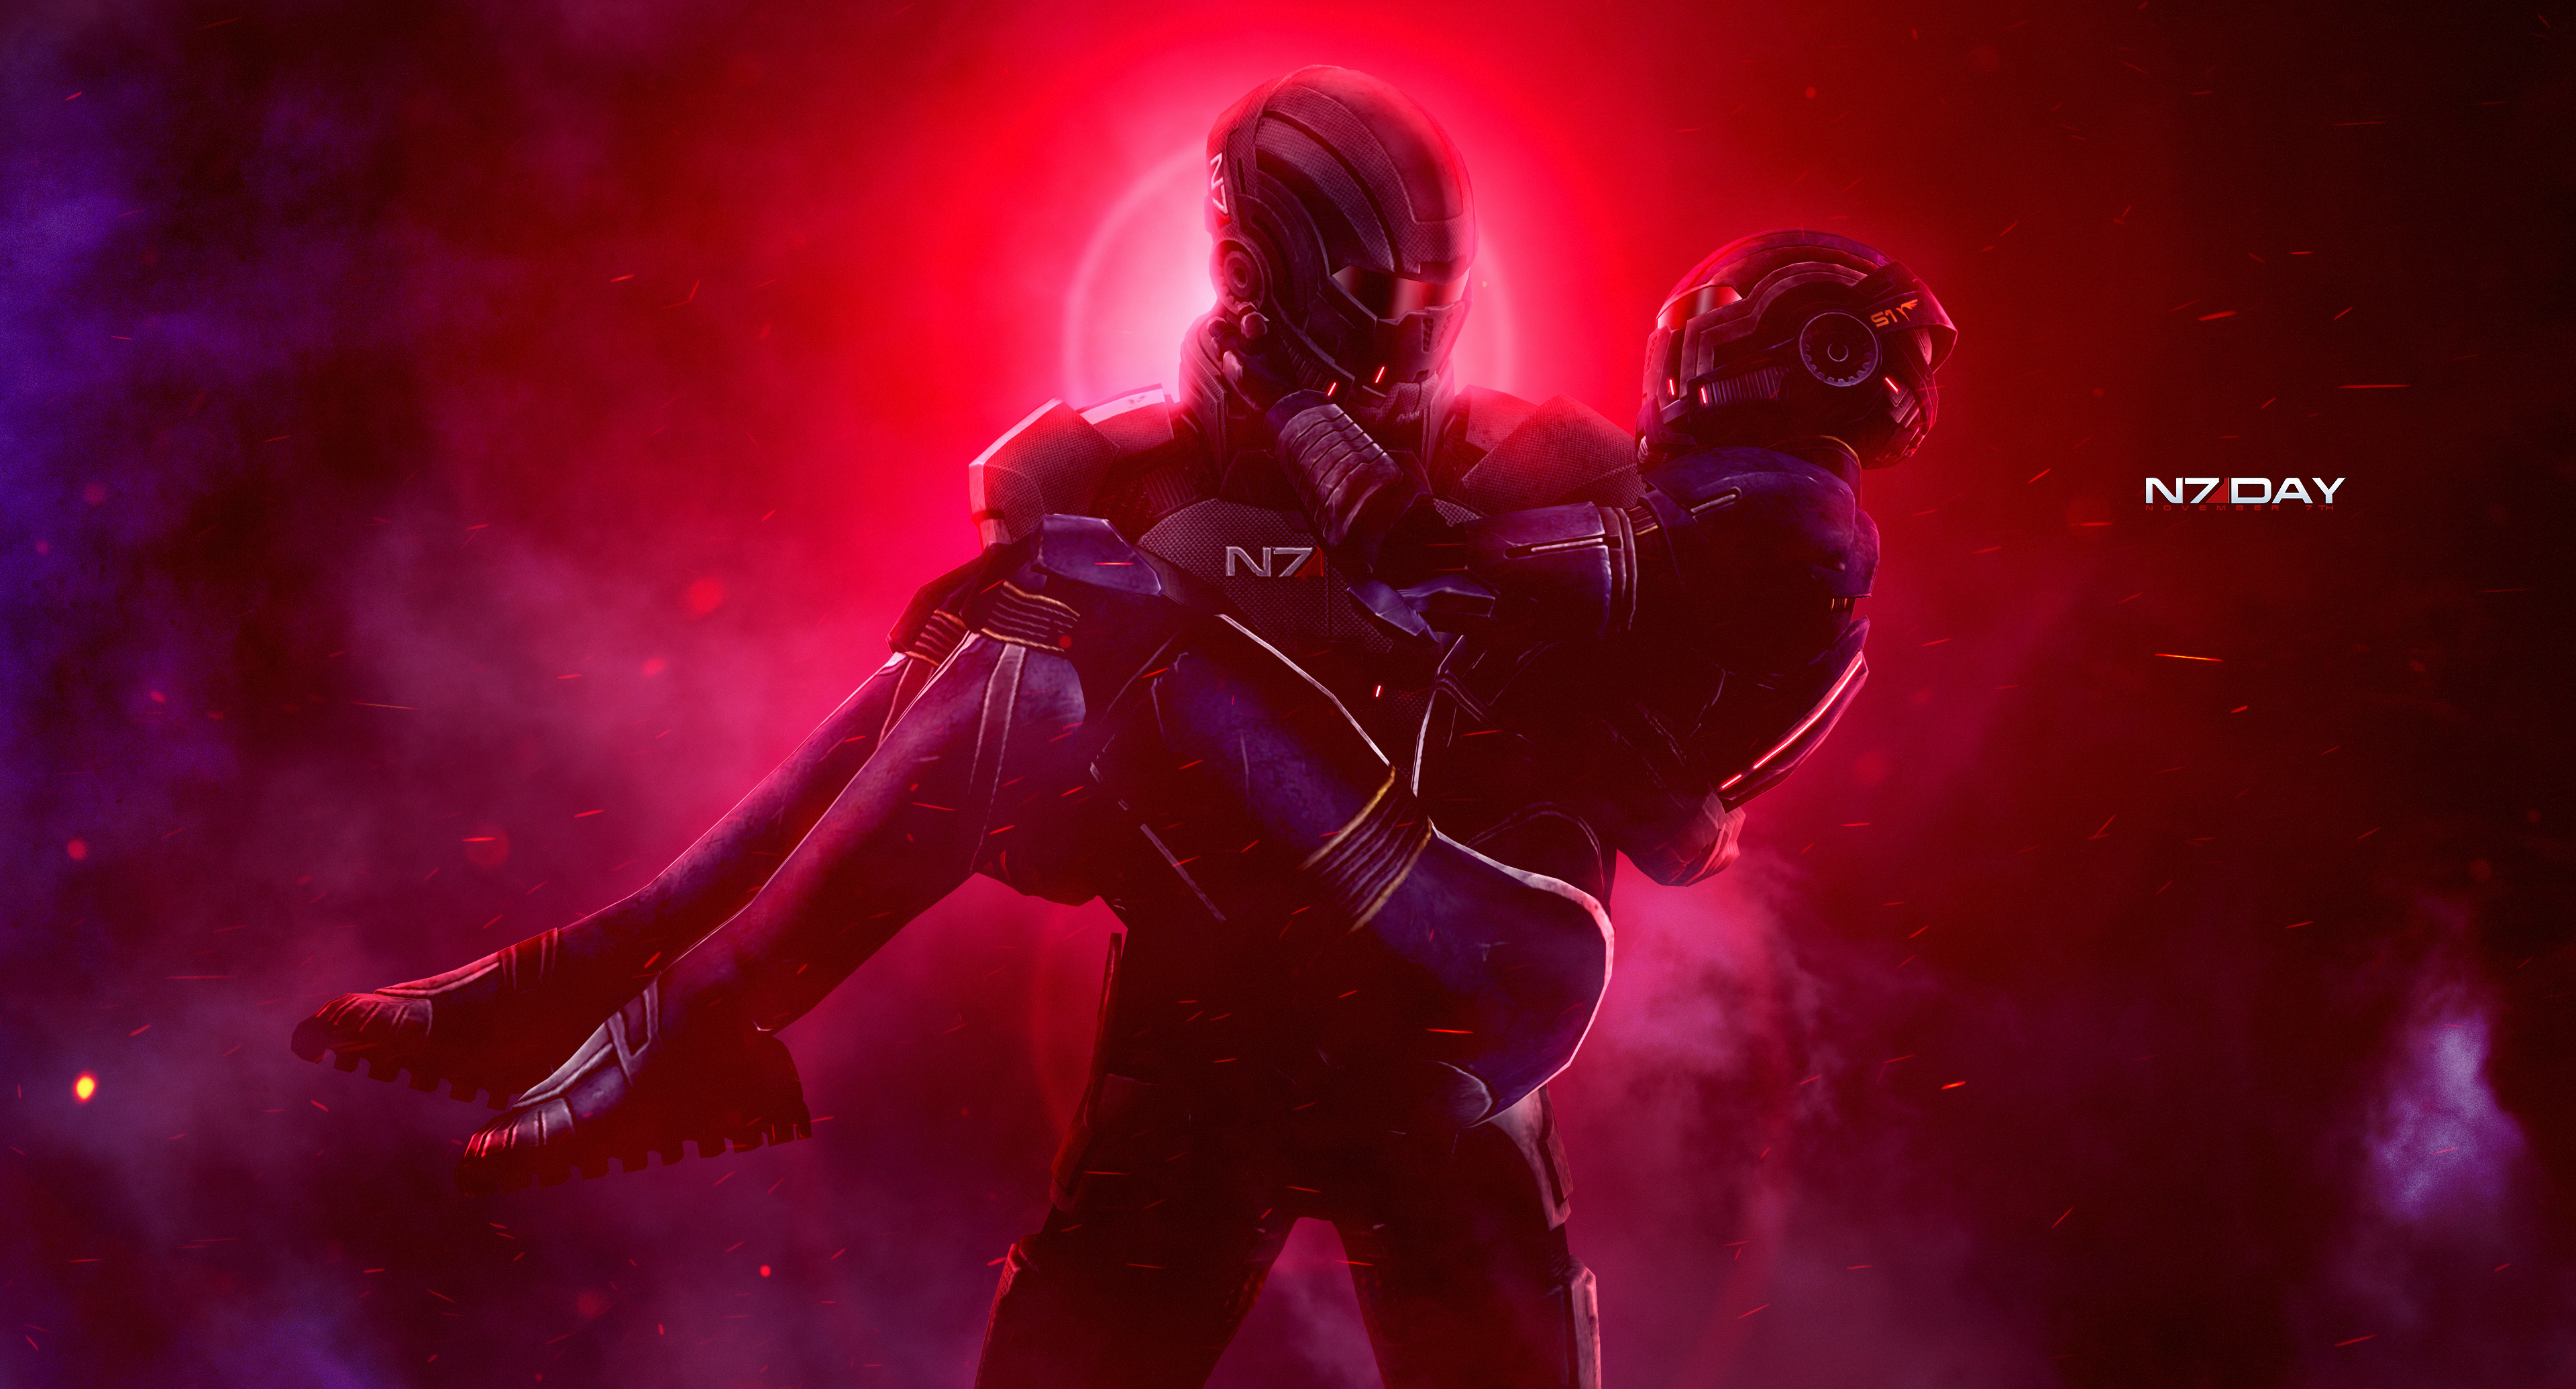 Together - Mass Effect N7 Day by Alexander Manakhov